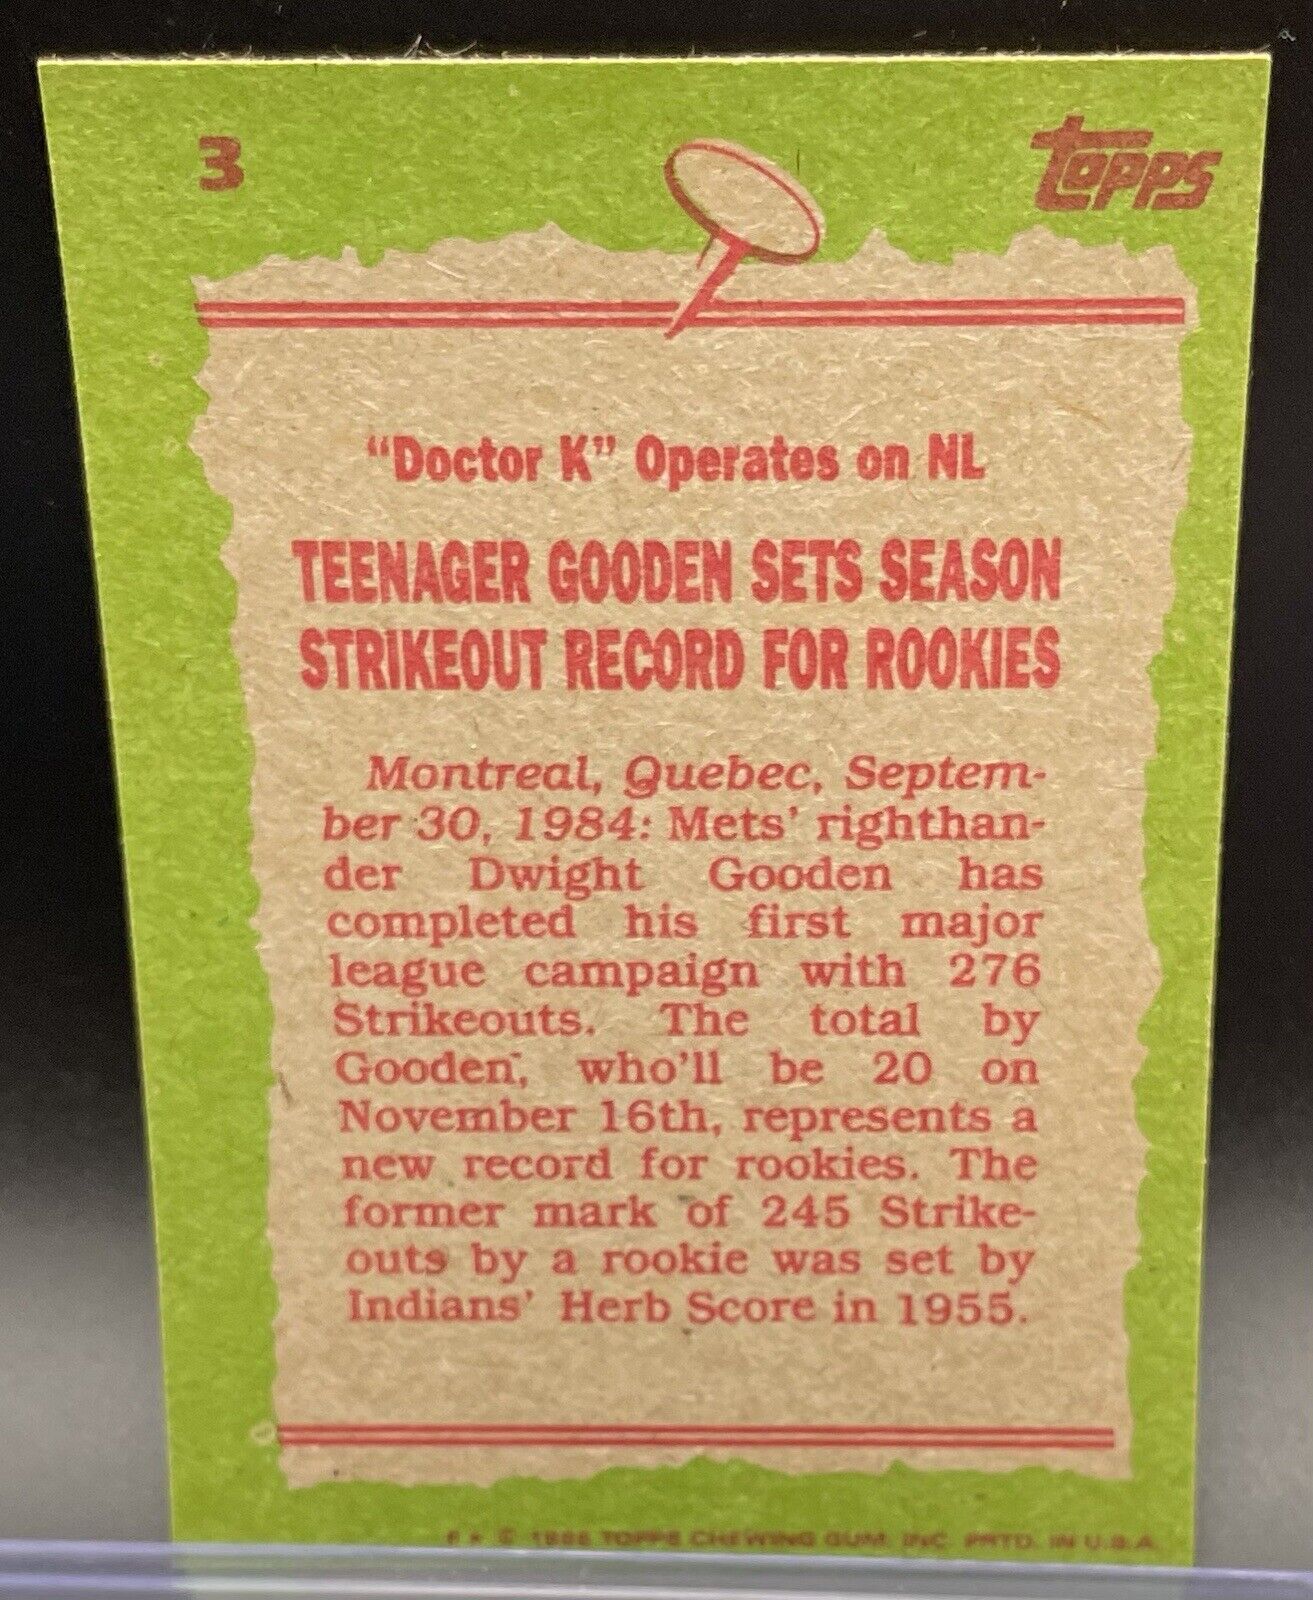 1985 Topps Dwight Gooden Rookie Year #3 Record Breaker RARE CARDS💥🔥💥🔥Dr.K